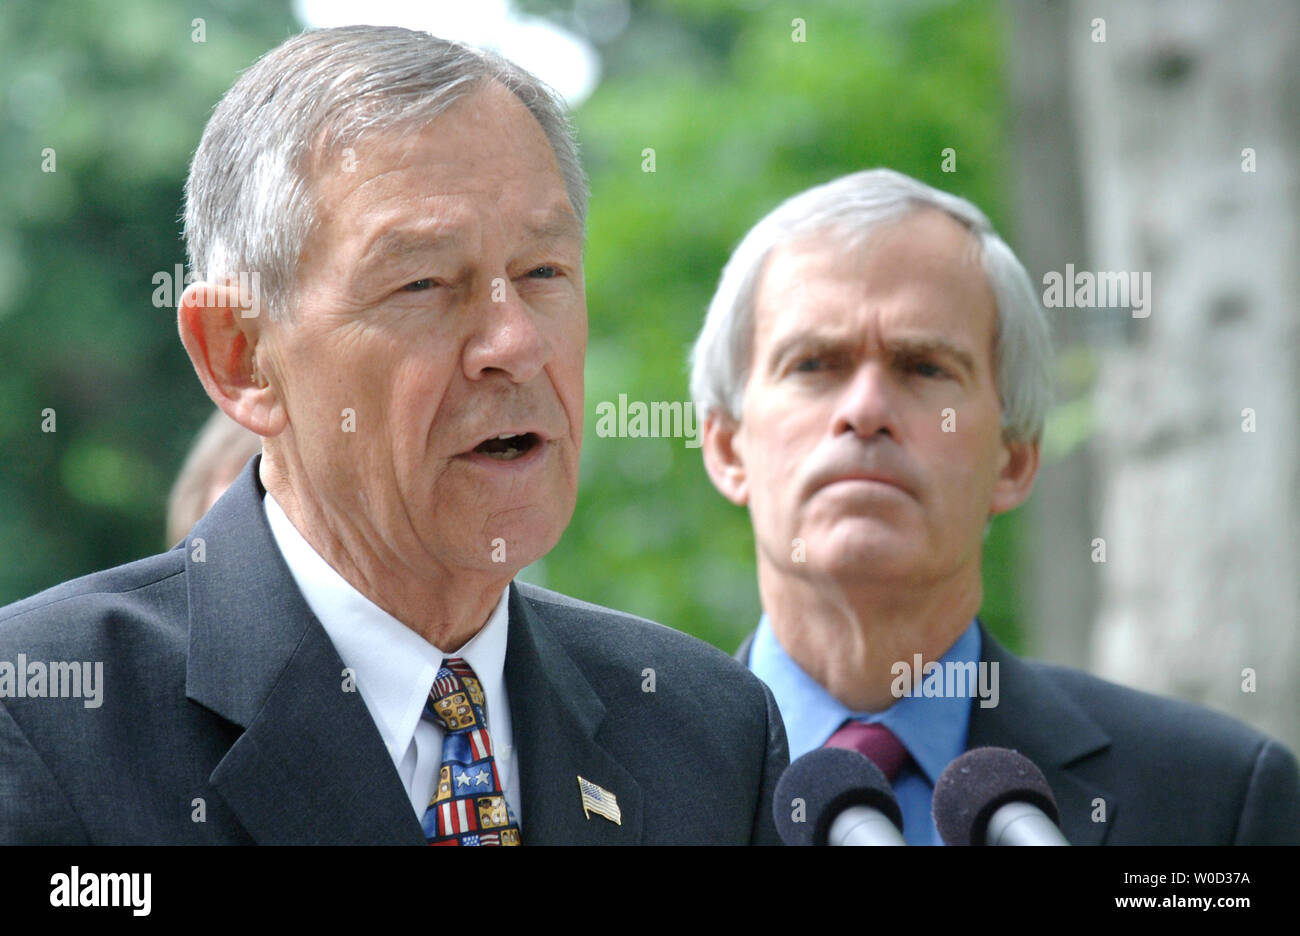 Sen. George Voinovich (R-OH) speaks on the Health Partnership Act of 2006, at a press conference in Washington on May 9, 2006. This legislation is aimed at extending health care to the uninsured and the reduction of health care cost. Voinovich was joined by Sen. Jeff Bingaman (D-NM). (UPI Photo/Kevin Dietsch) Stock Photo